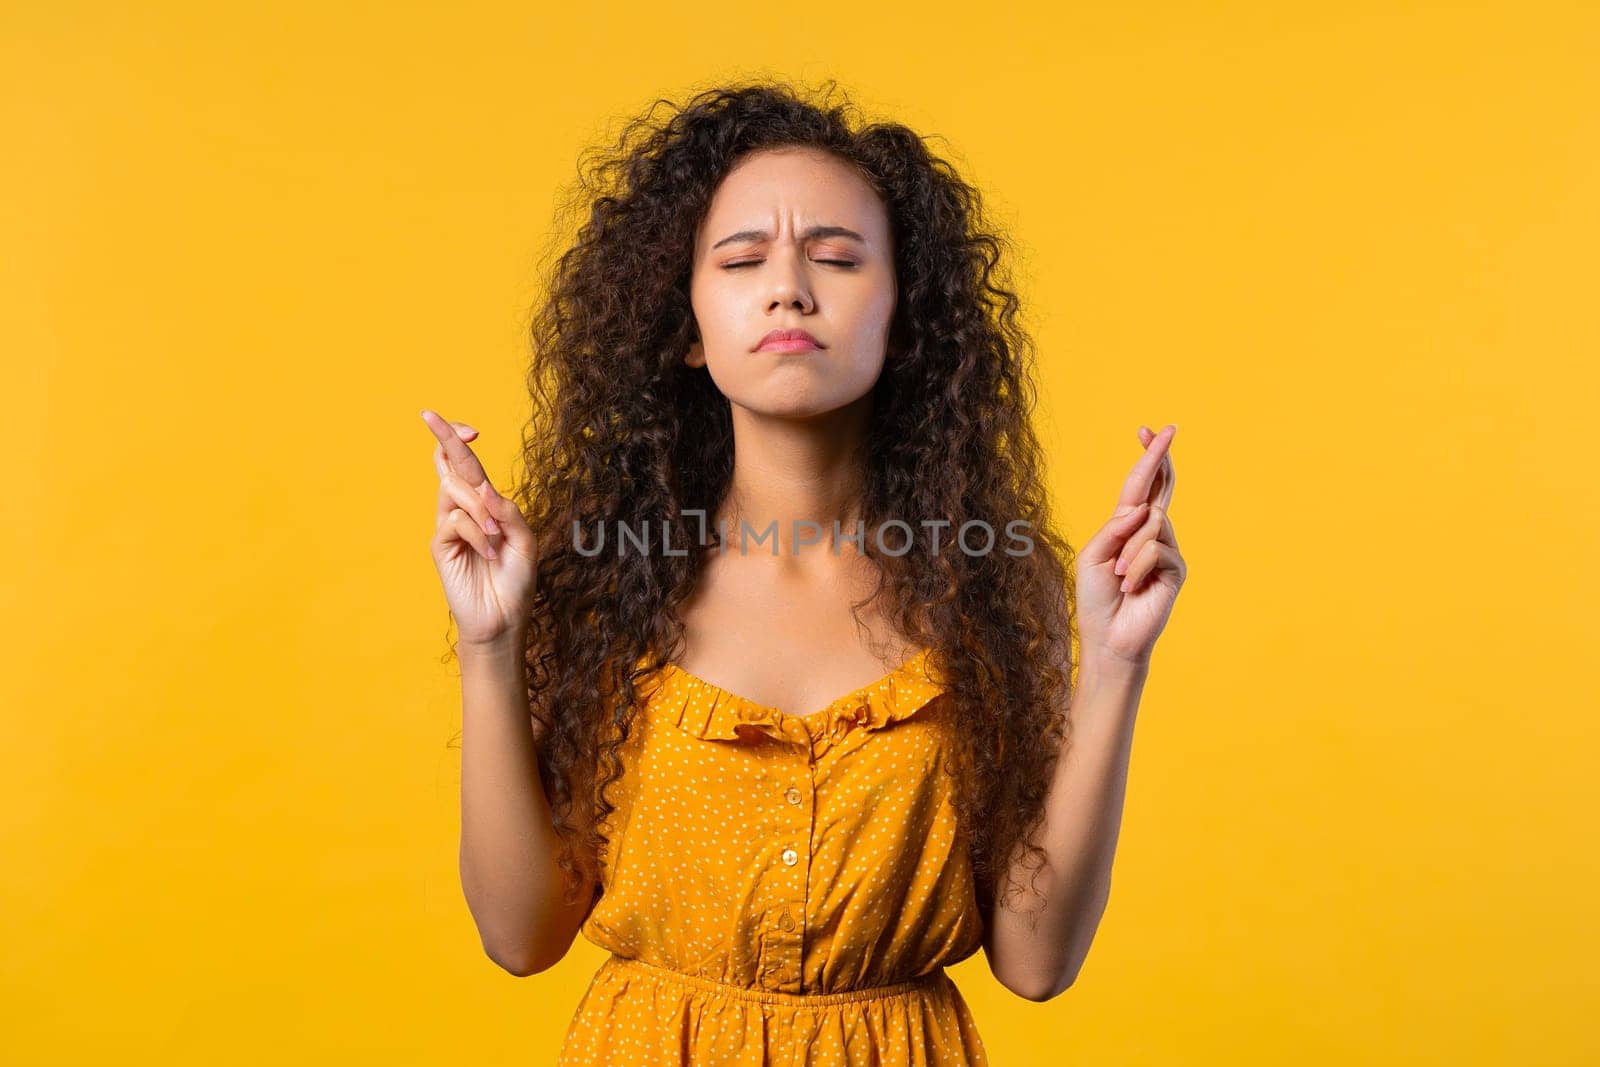 Student praying with crossed fingers on yellow background. Woman begs someone satisfy desires, help with, prays for luck in exam. High quality